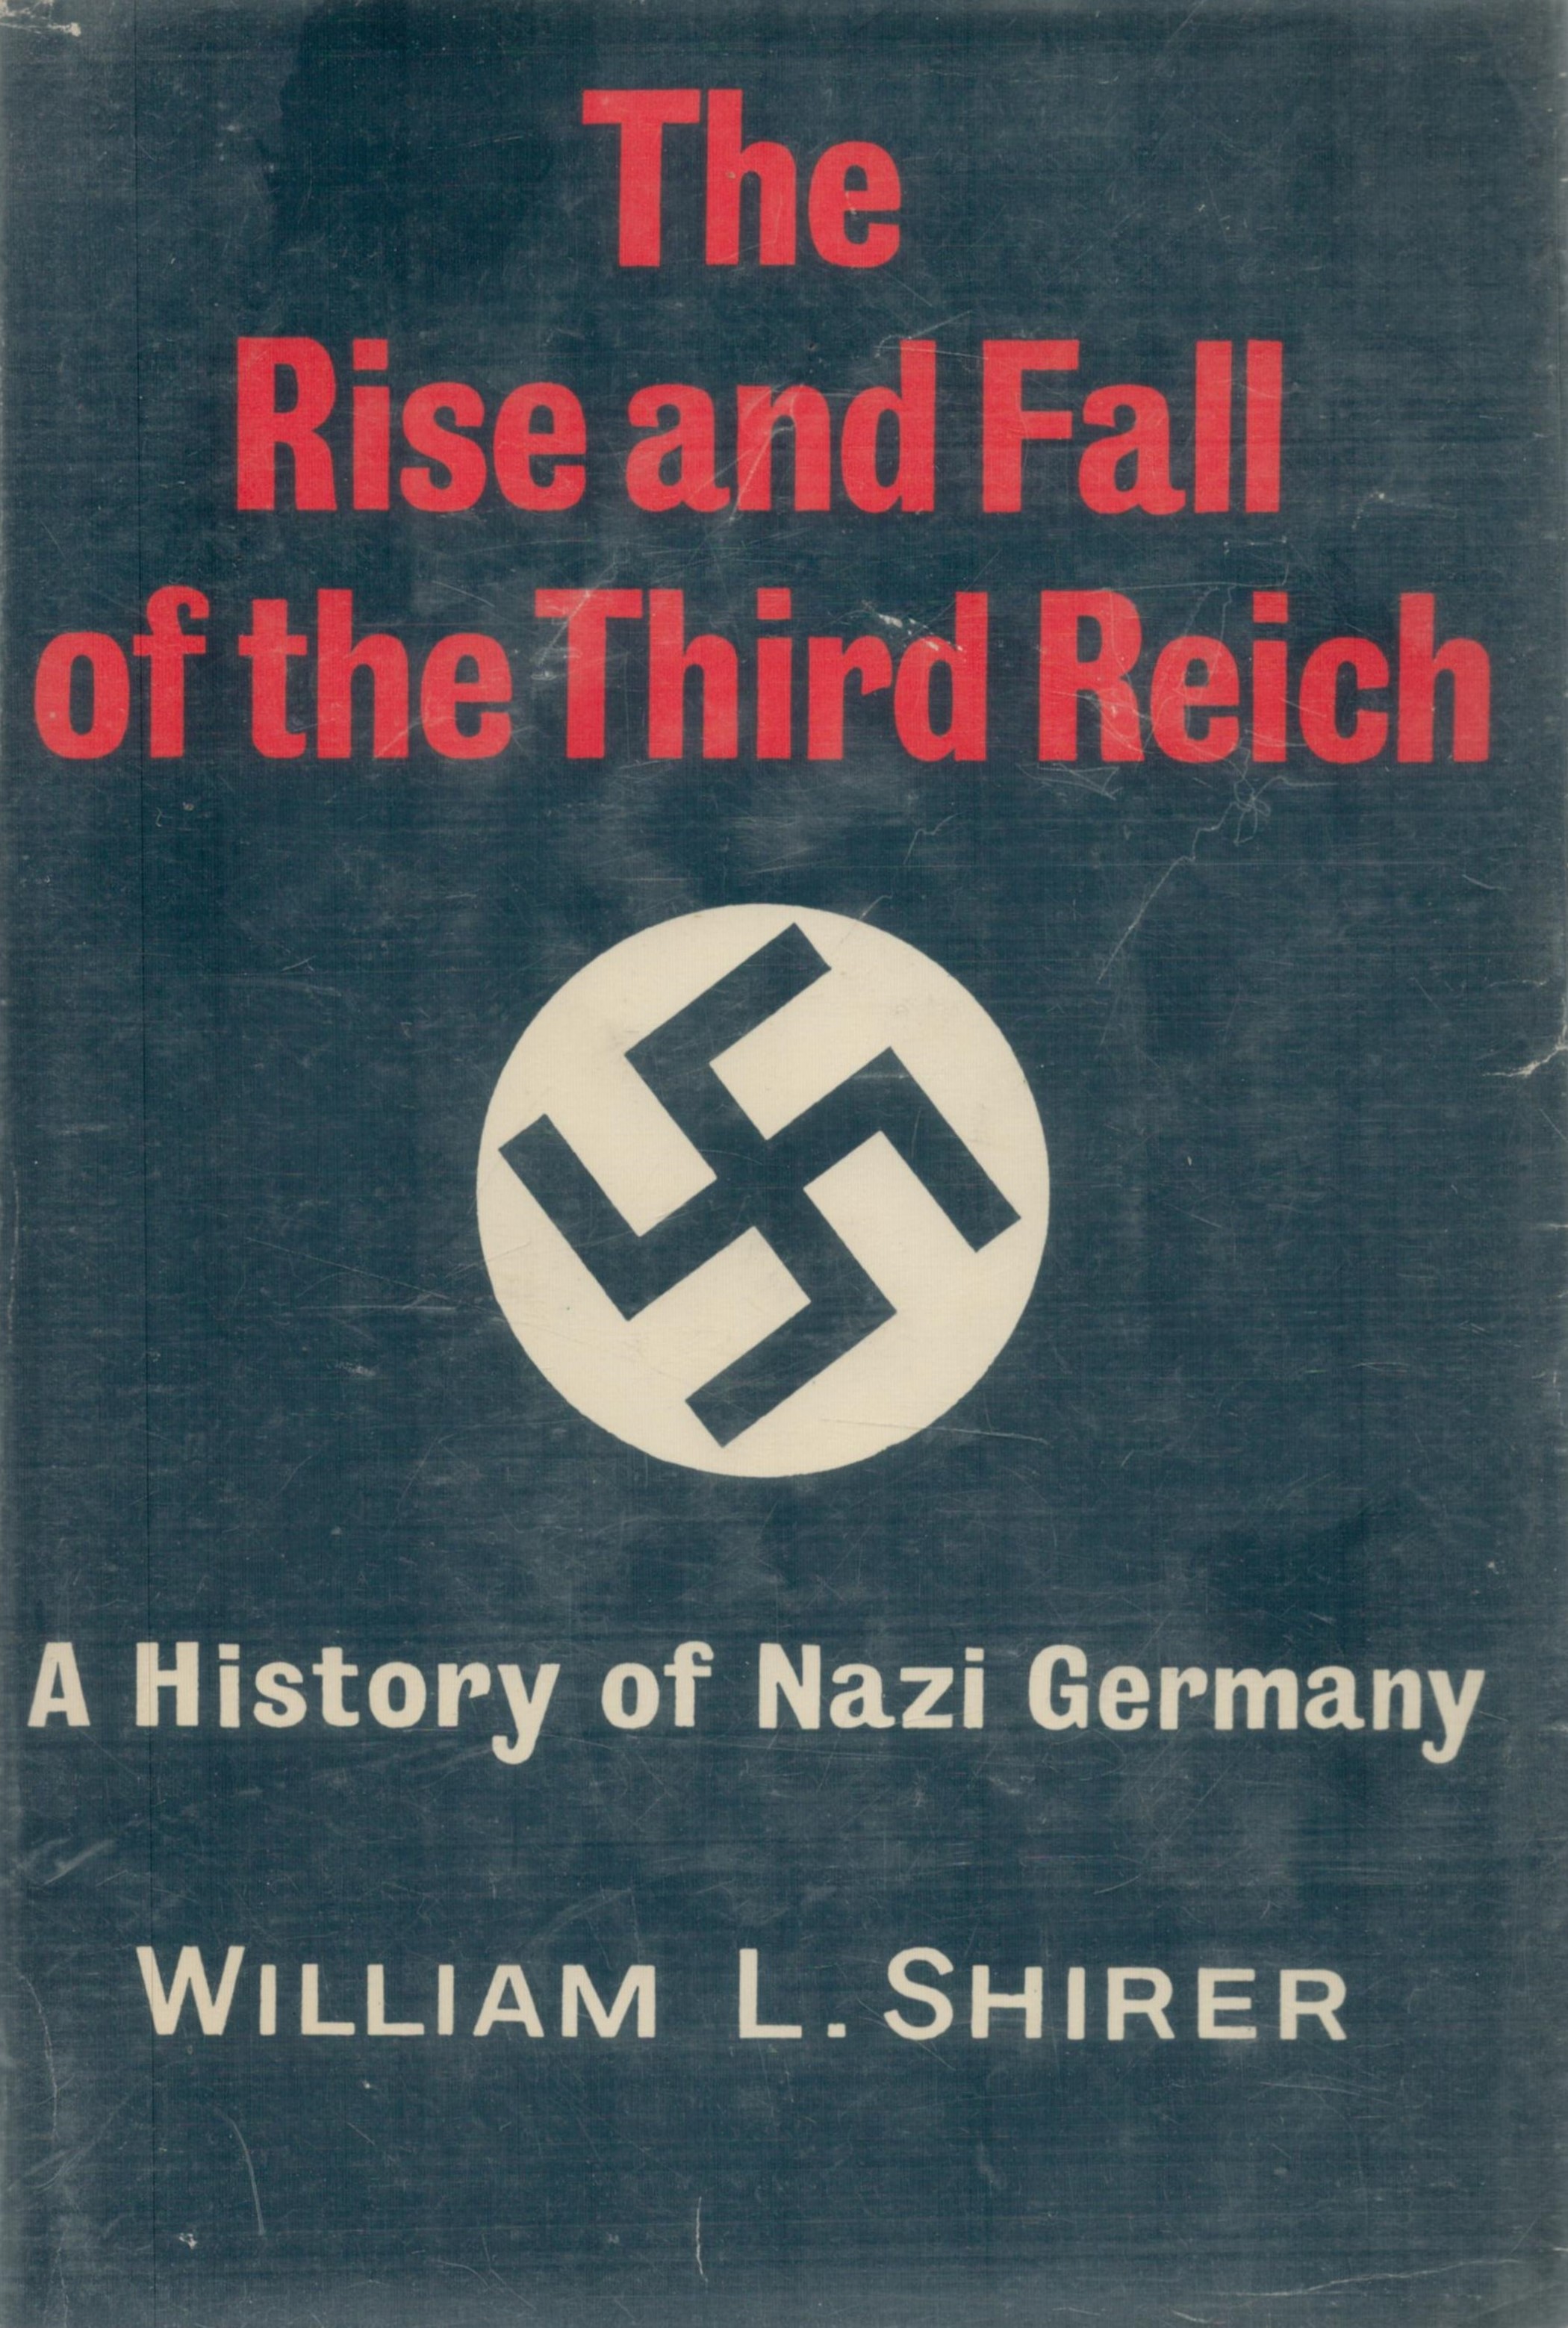 The Rise and Fall of the Third Reich A History of Nazi Germany by William L Shirer 1970 Book Club